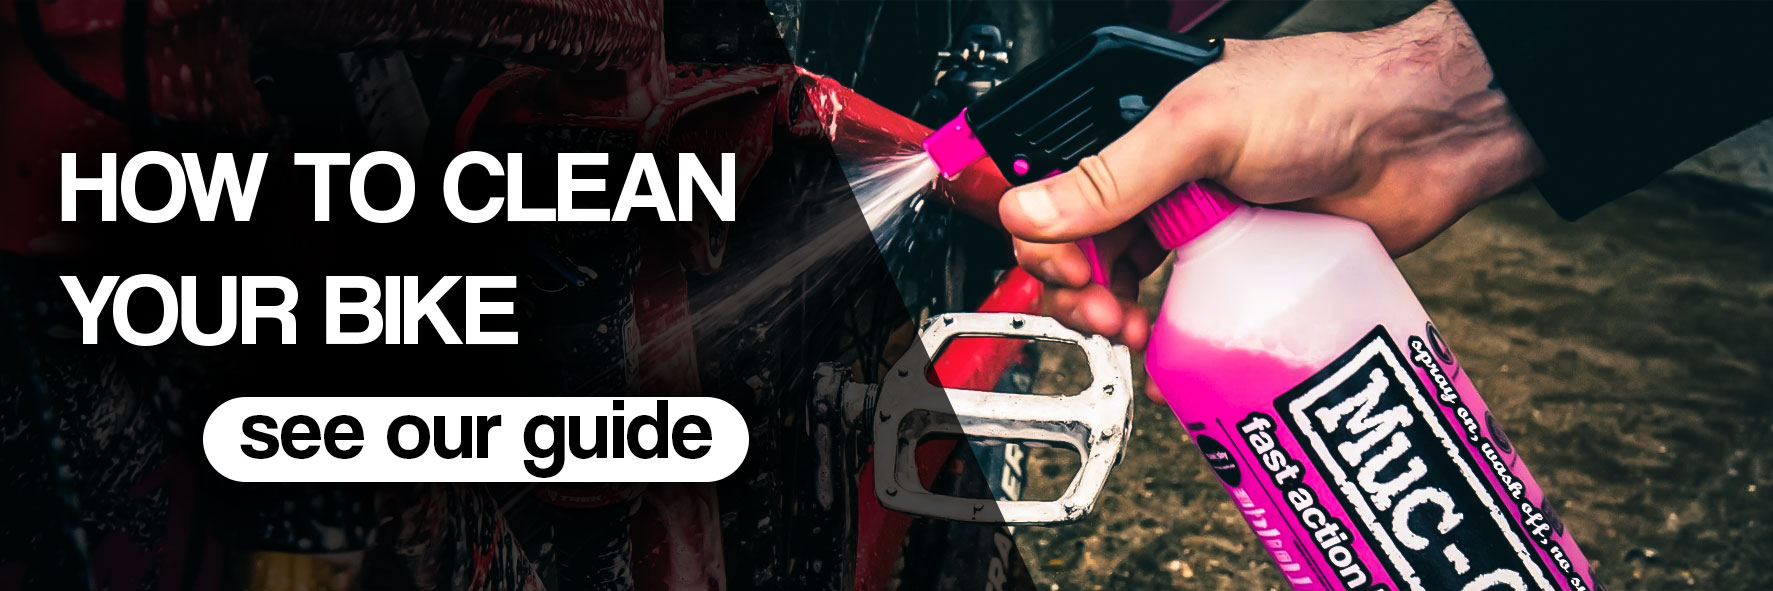 Cleaning guide for your bike